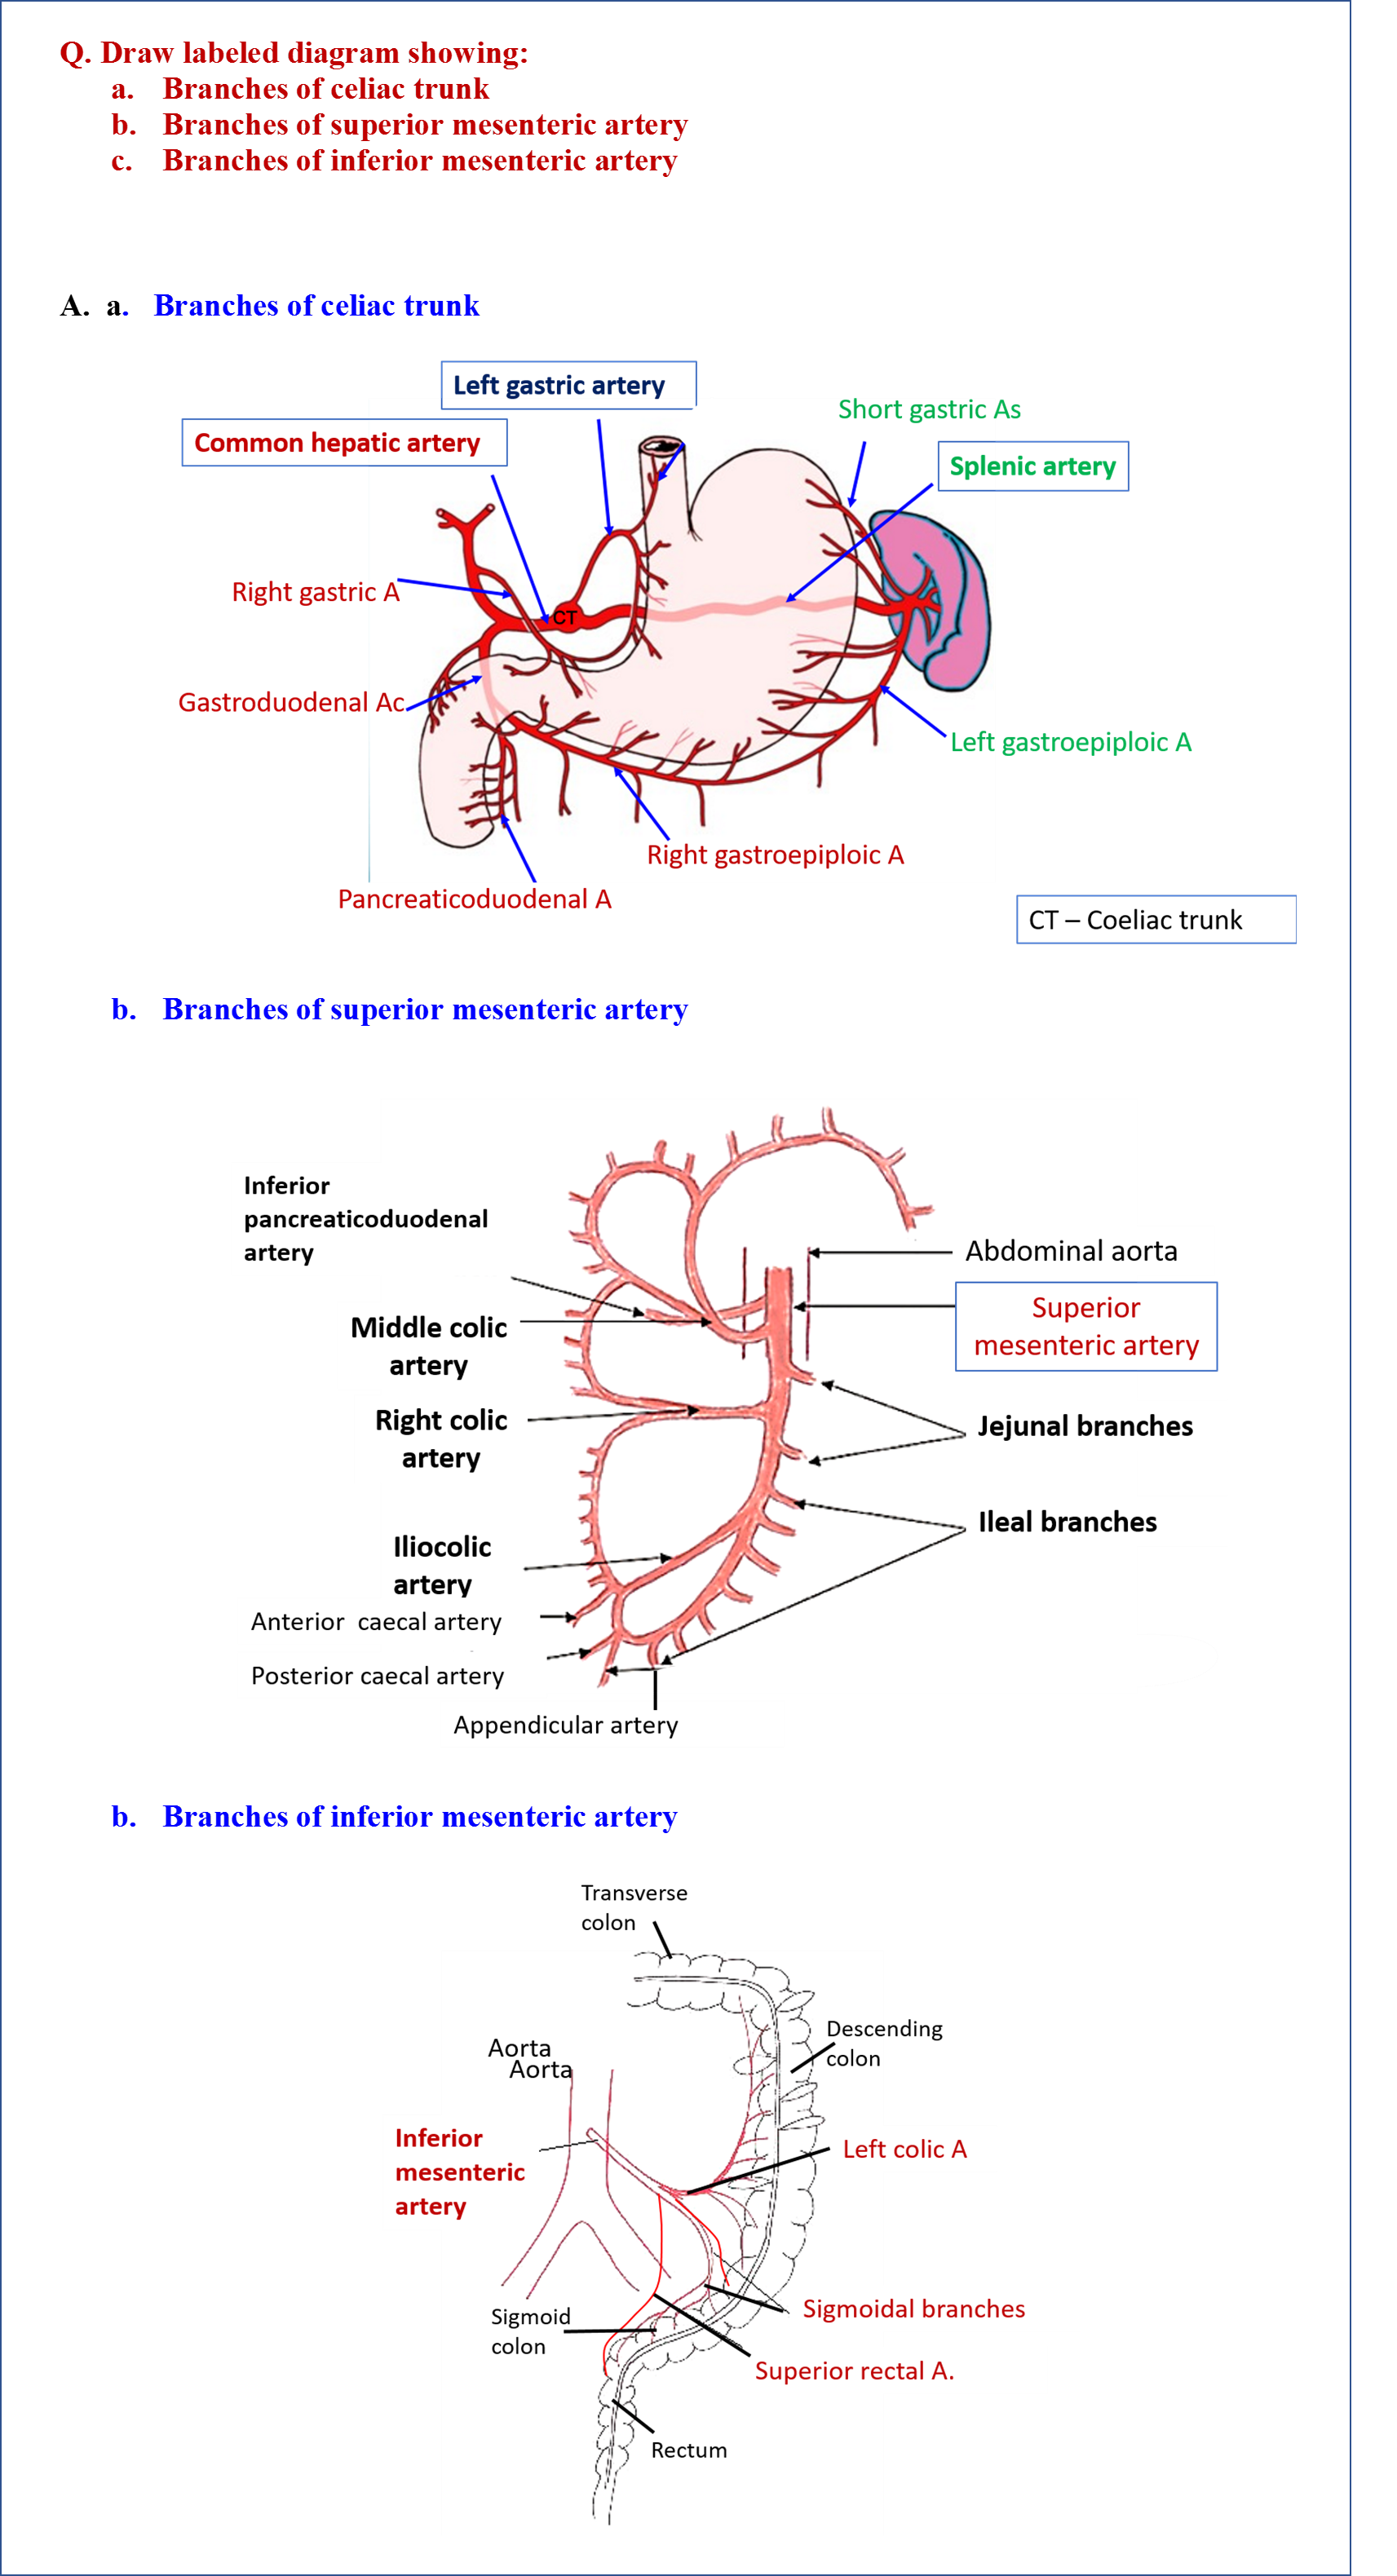 Diagram Showing Branches of Coeliac trunk, Superior and Inferior Mesenteric Arteries